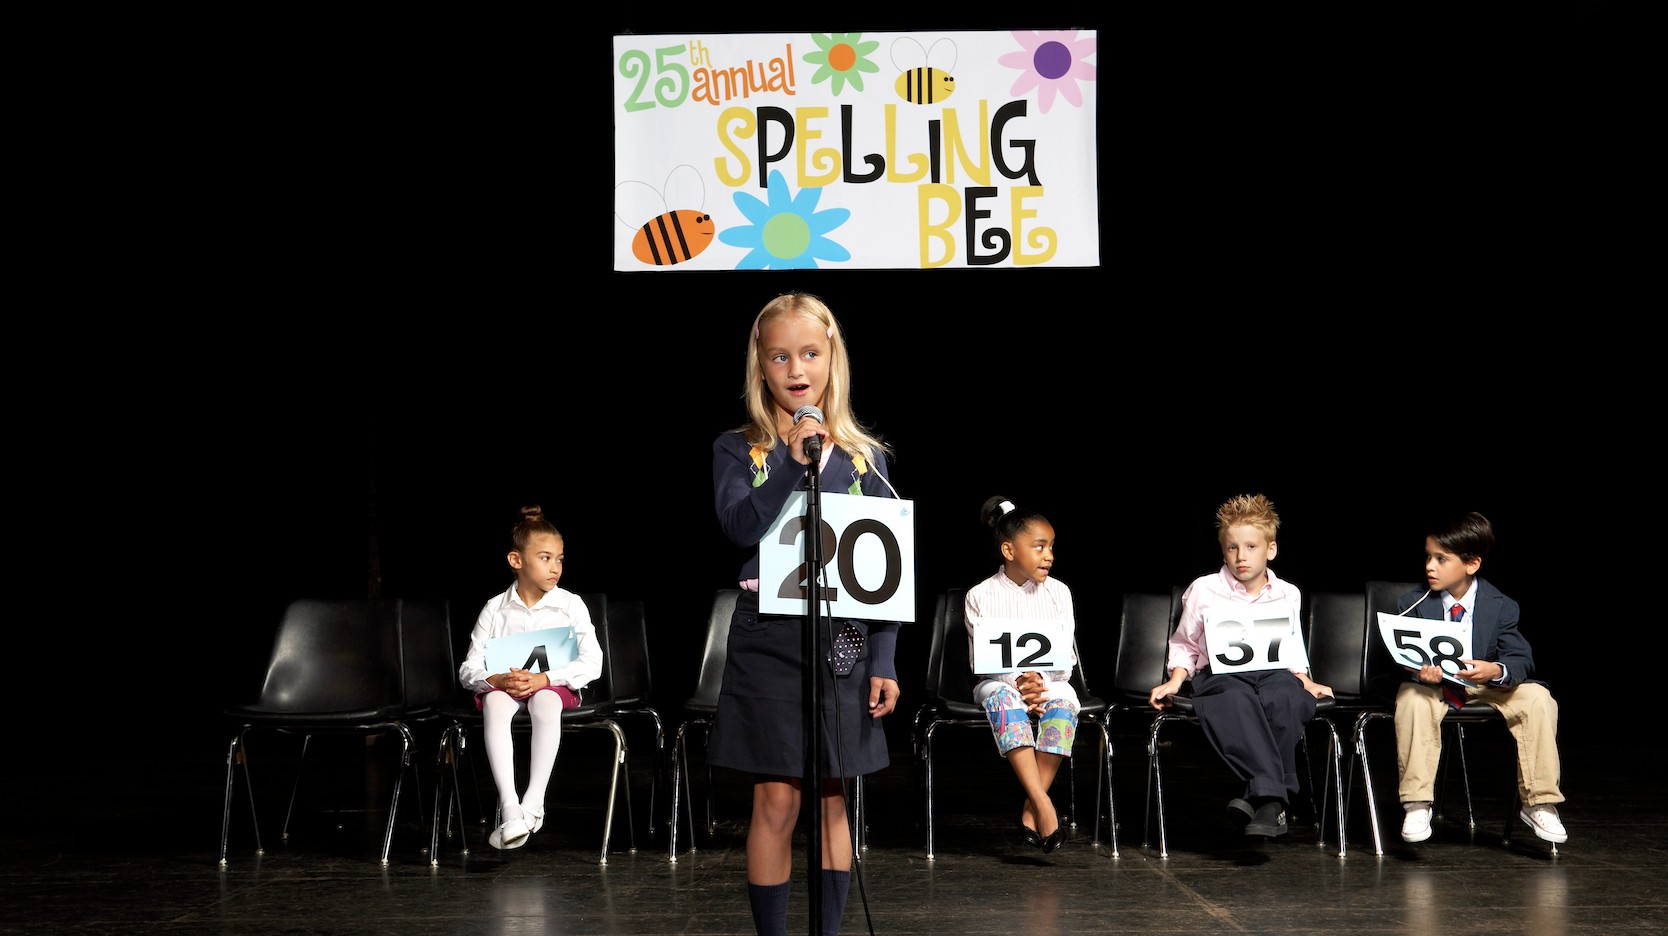 Spelling bee competition with black background